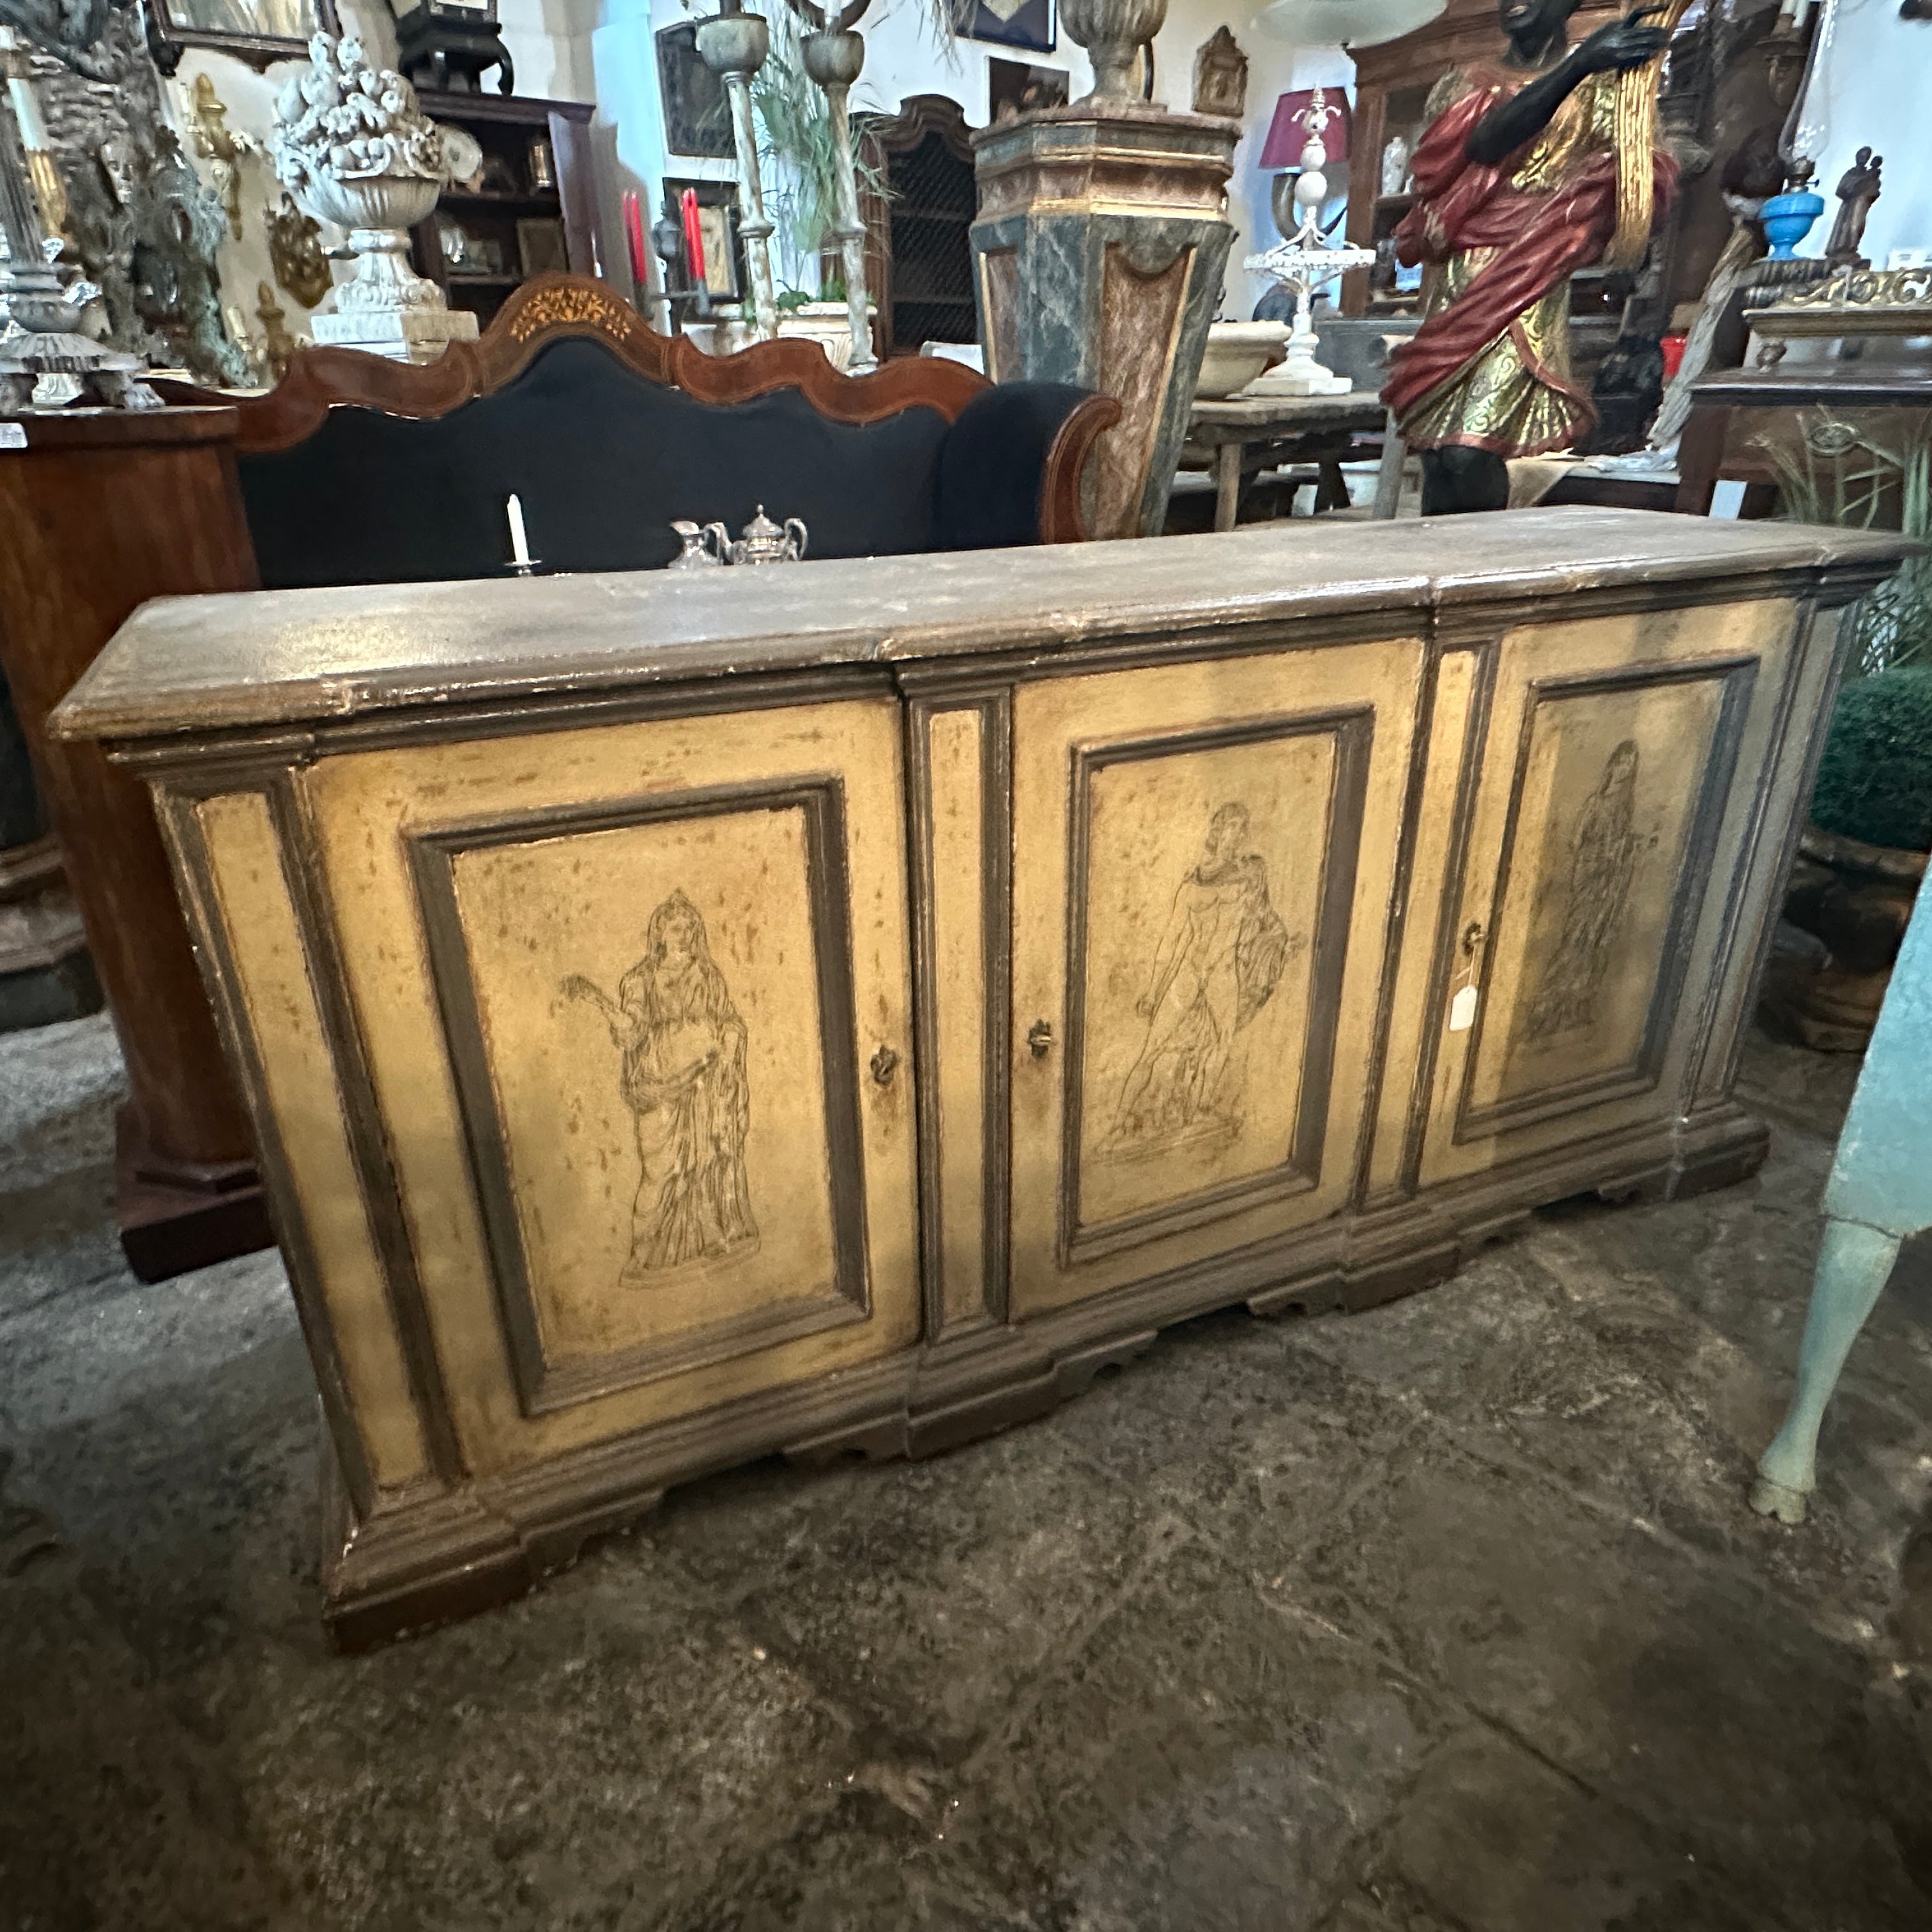 A gray and white ivory lacquered wood credenza hand-crafted in Italy in late 19th century in a neoclassical style, the three decors depict three statues of Pompei. The credenza features characteristics associated with the Neoclassical design